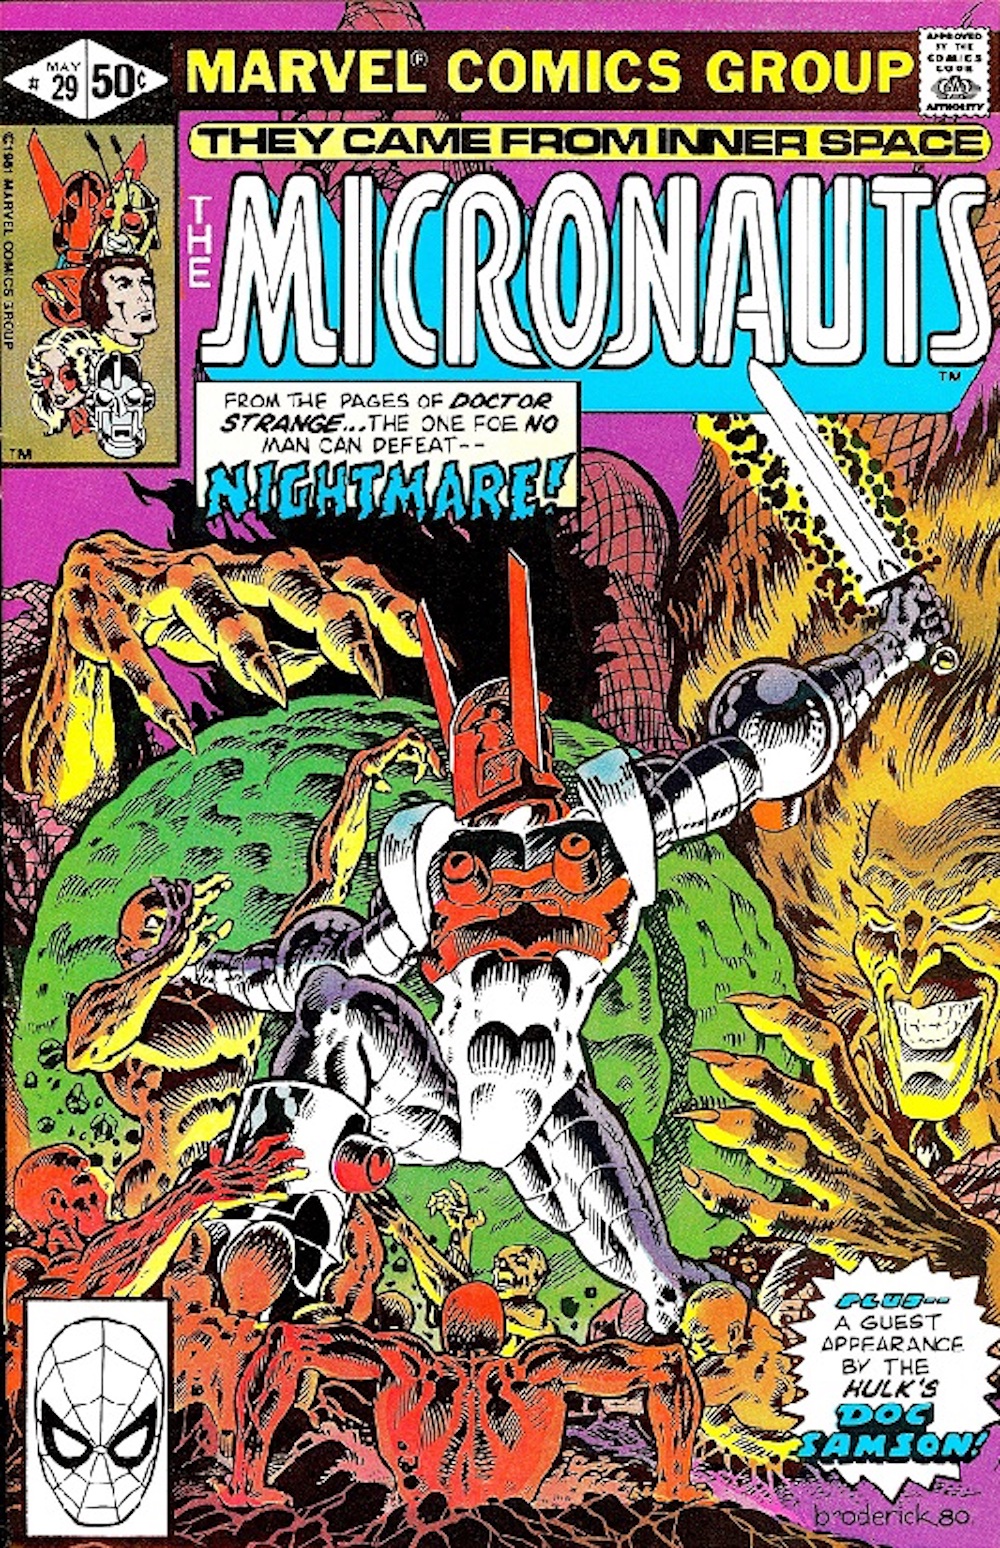 The Micronauts Issue 29, Selective Memory